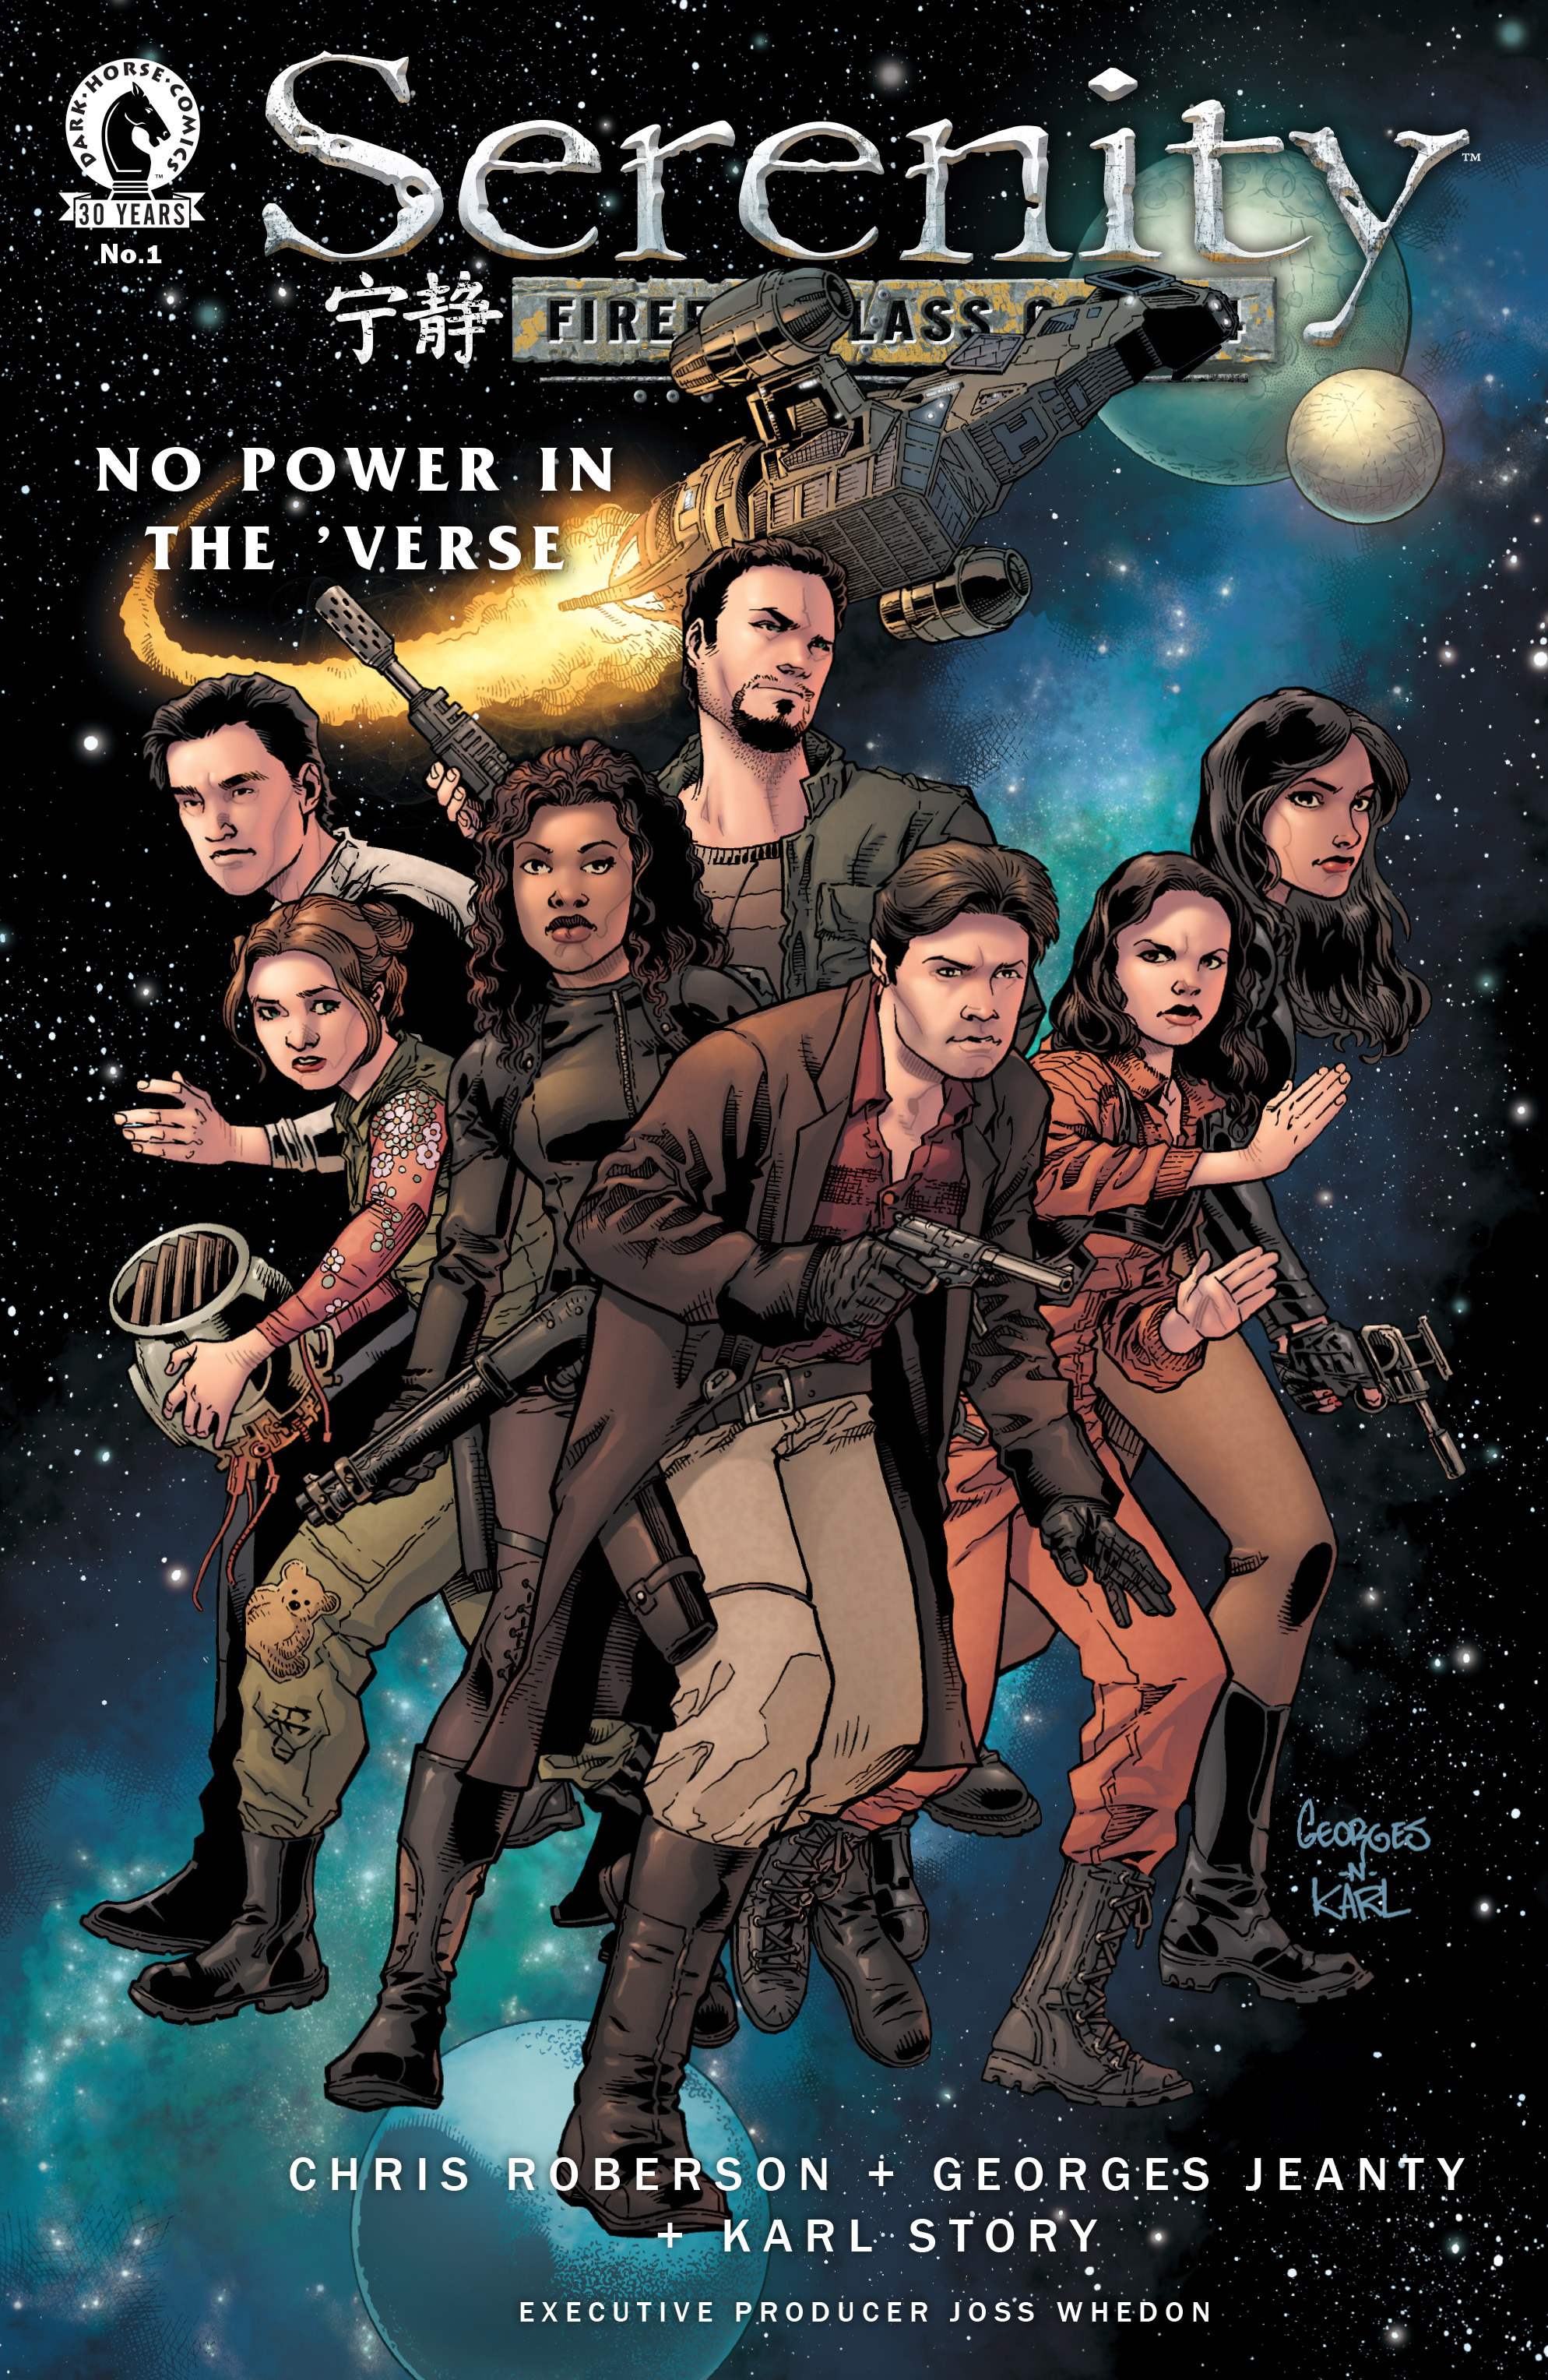 Read online Serenity: Firefly Class 03-K64 – No Power in the 'Verse comic -  Issue #1 - 2